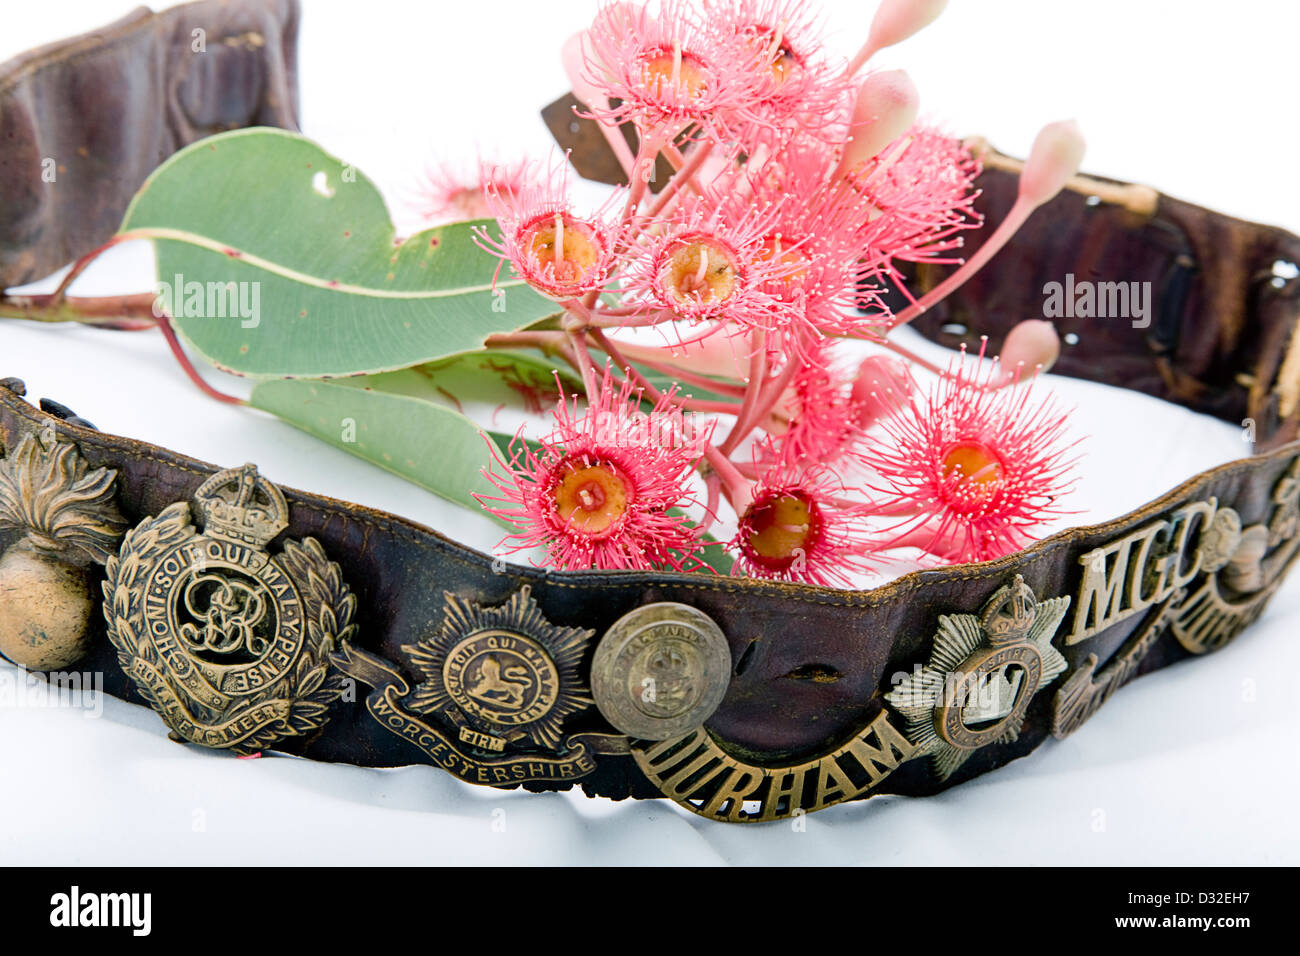 Image of First World War Army Belt with medals and badges attached and some  Australian Native Grevillea flowers Stock Photo